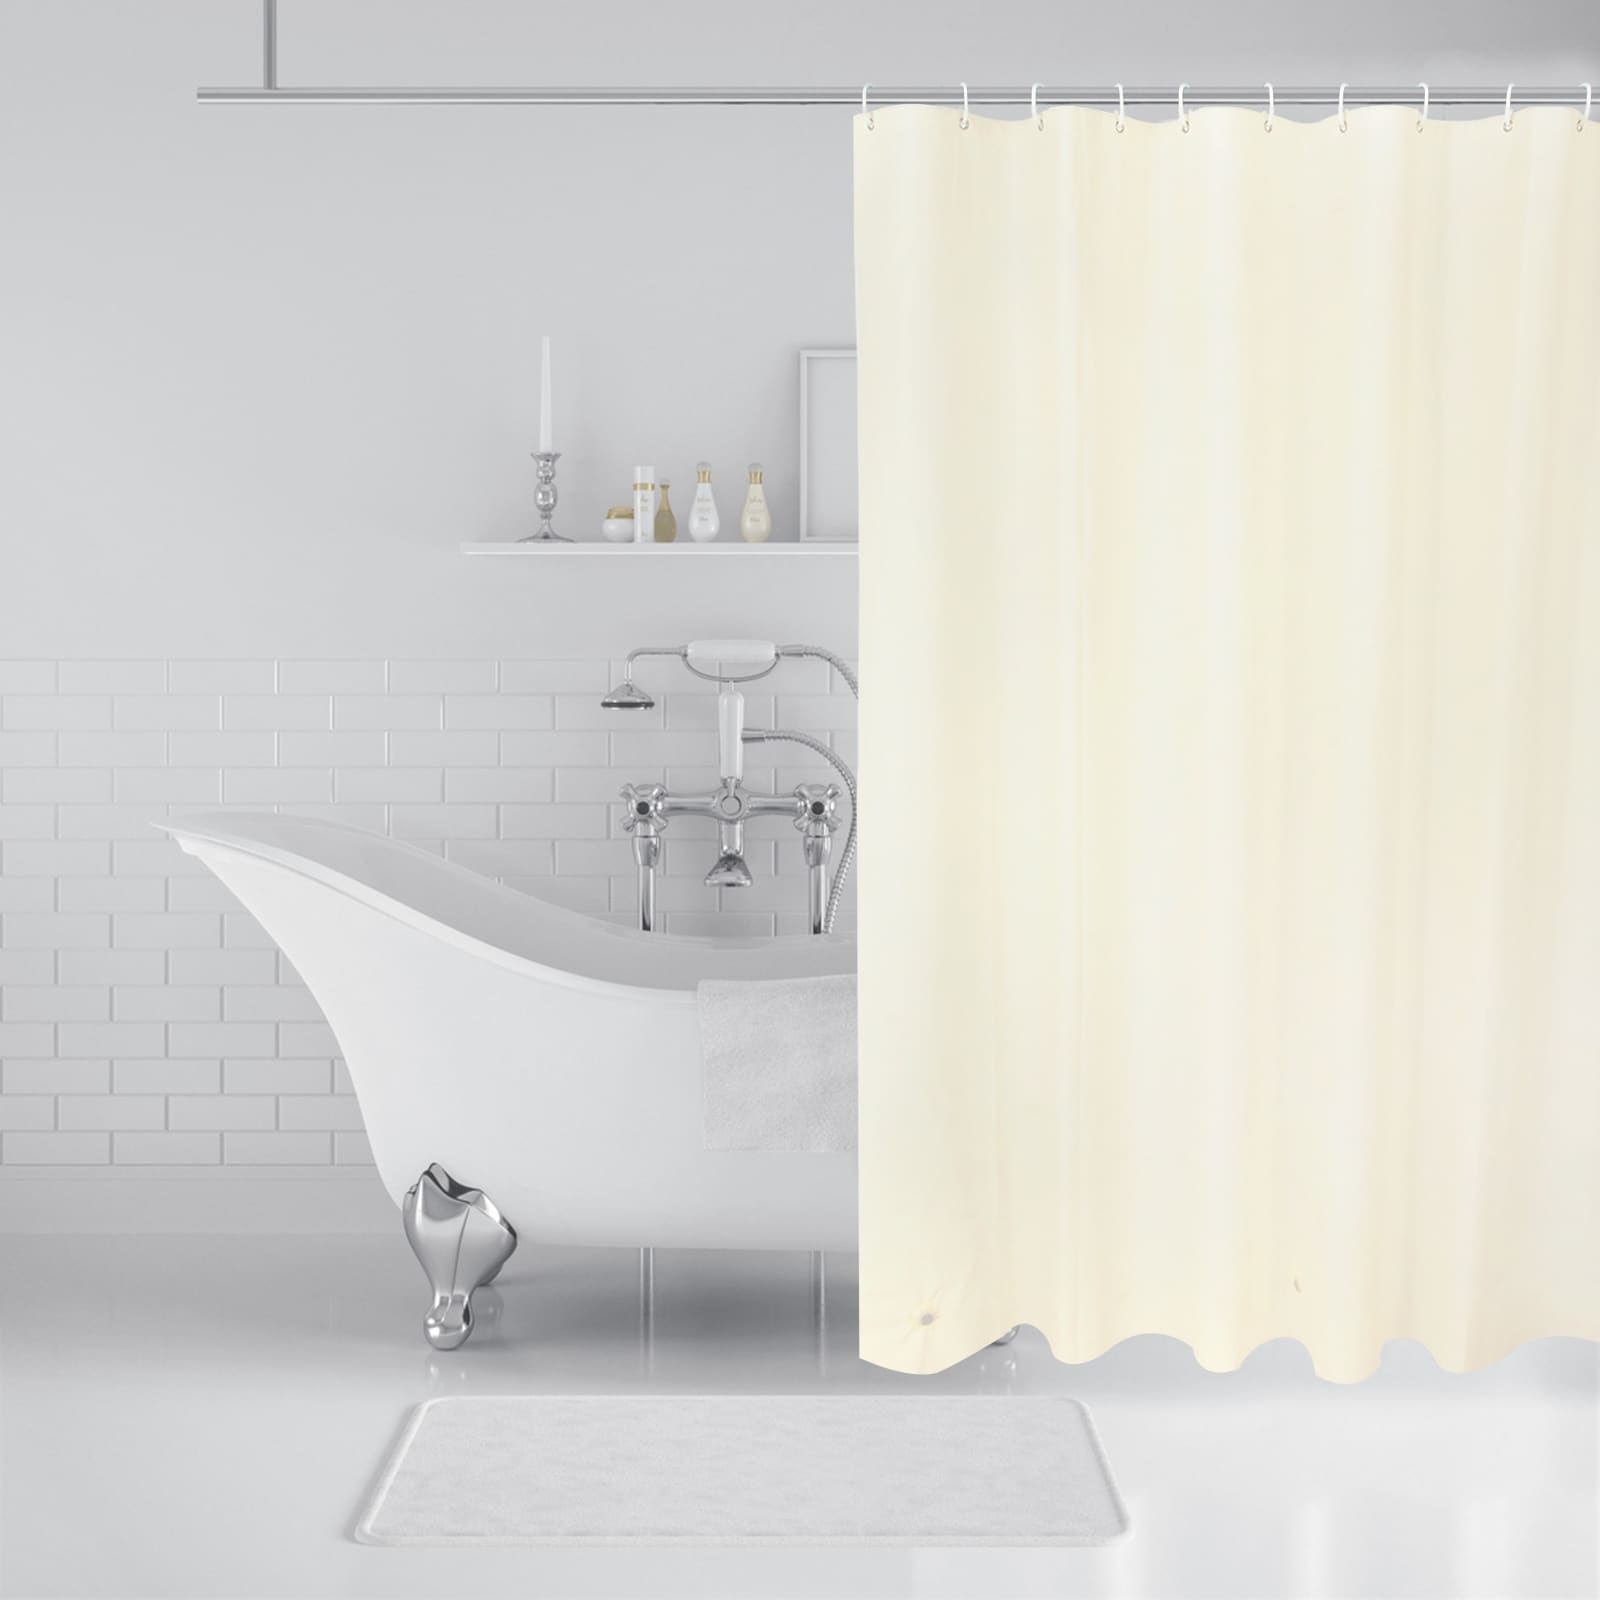 https://ak1.ostkcdn.com/images/products/is/images/direct/c52b3d2290d06569d686e0912de8b8bf6c252232/Global-Pronex-Shower-Curtain-Liner-with-Rustproof-Metal-Grommet%2C3-Magnets%2CFree-12-Hooks---Non-Toxic%2C-Odor-Free-%2C70x72-inches.jpg